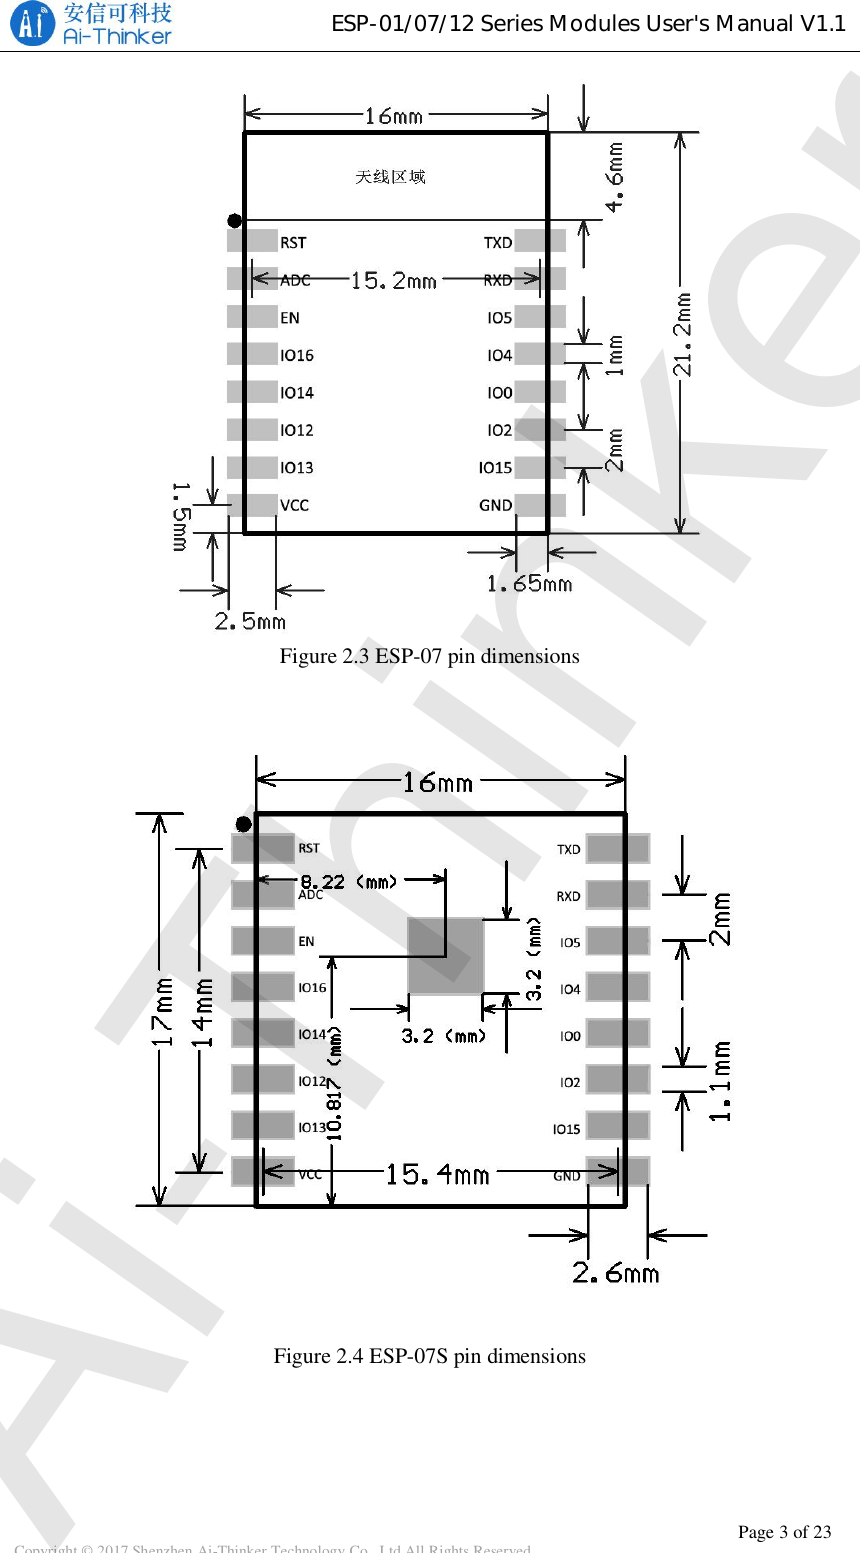 ESP-01/07/12SeriesModulesUser&apos;sManualV1.1Copyright © 2017 Shenzhen Ai-Thinker Technology Co., Ltd All Rights Reserved Page 3 of 23Figure 2.3 ESP-07 pin dimensionsFigure 2.4 ESP-07S pin dimensionsAi-Thinker